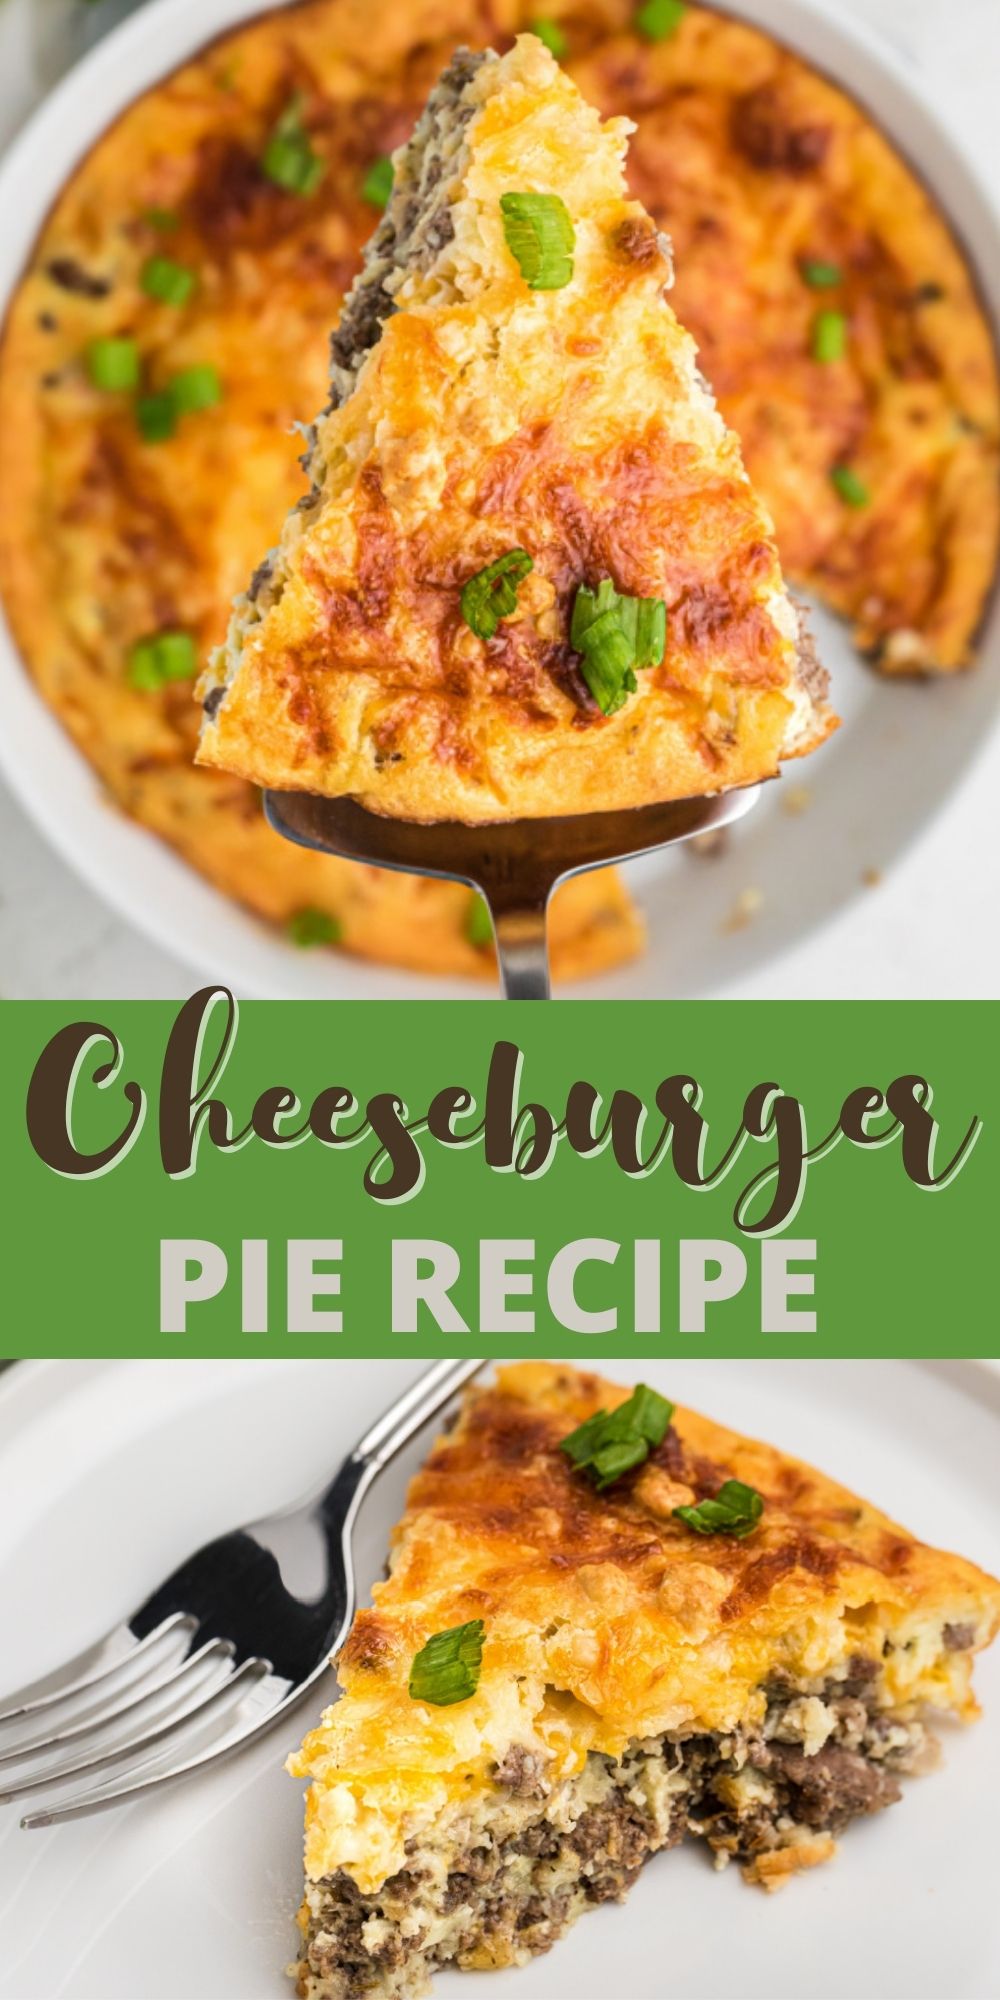 This delicious and easy Cheeseburger Pie is a hearty weeknight meal that the whole family will love. This easy family recipe is made with ground beef, Bisquick, cheese, and more. You'll love how delicious this dinner pie is and how fast it gets devoured!